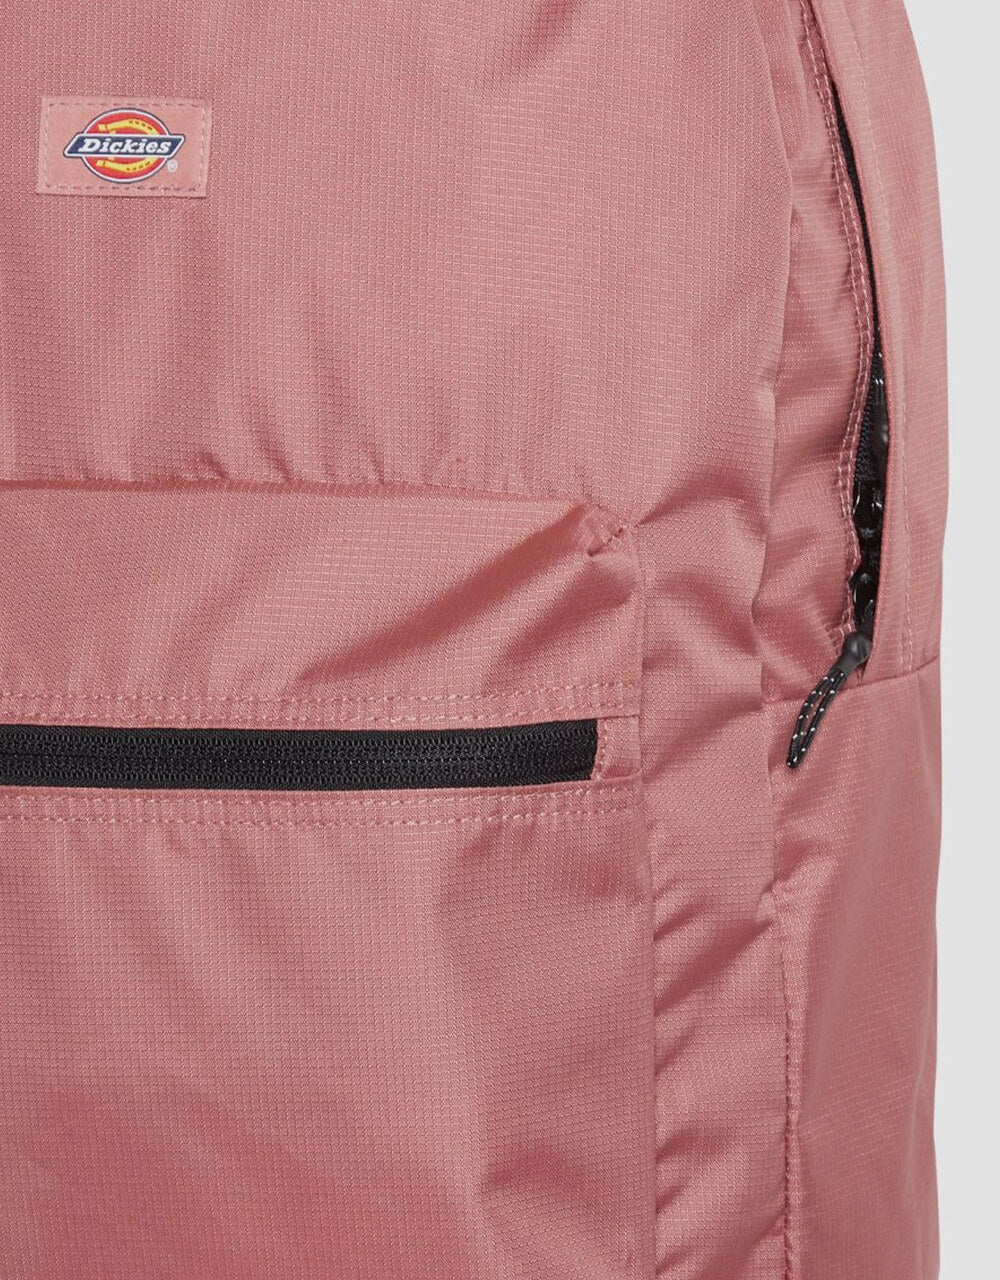 Dickies Chickaloon Backpack - Withered Rose